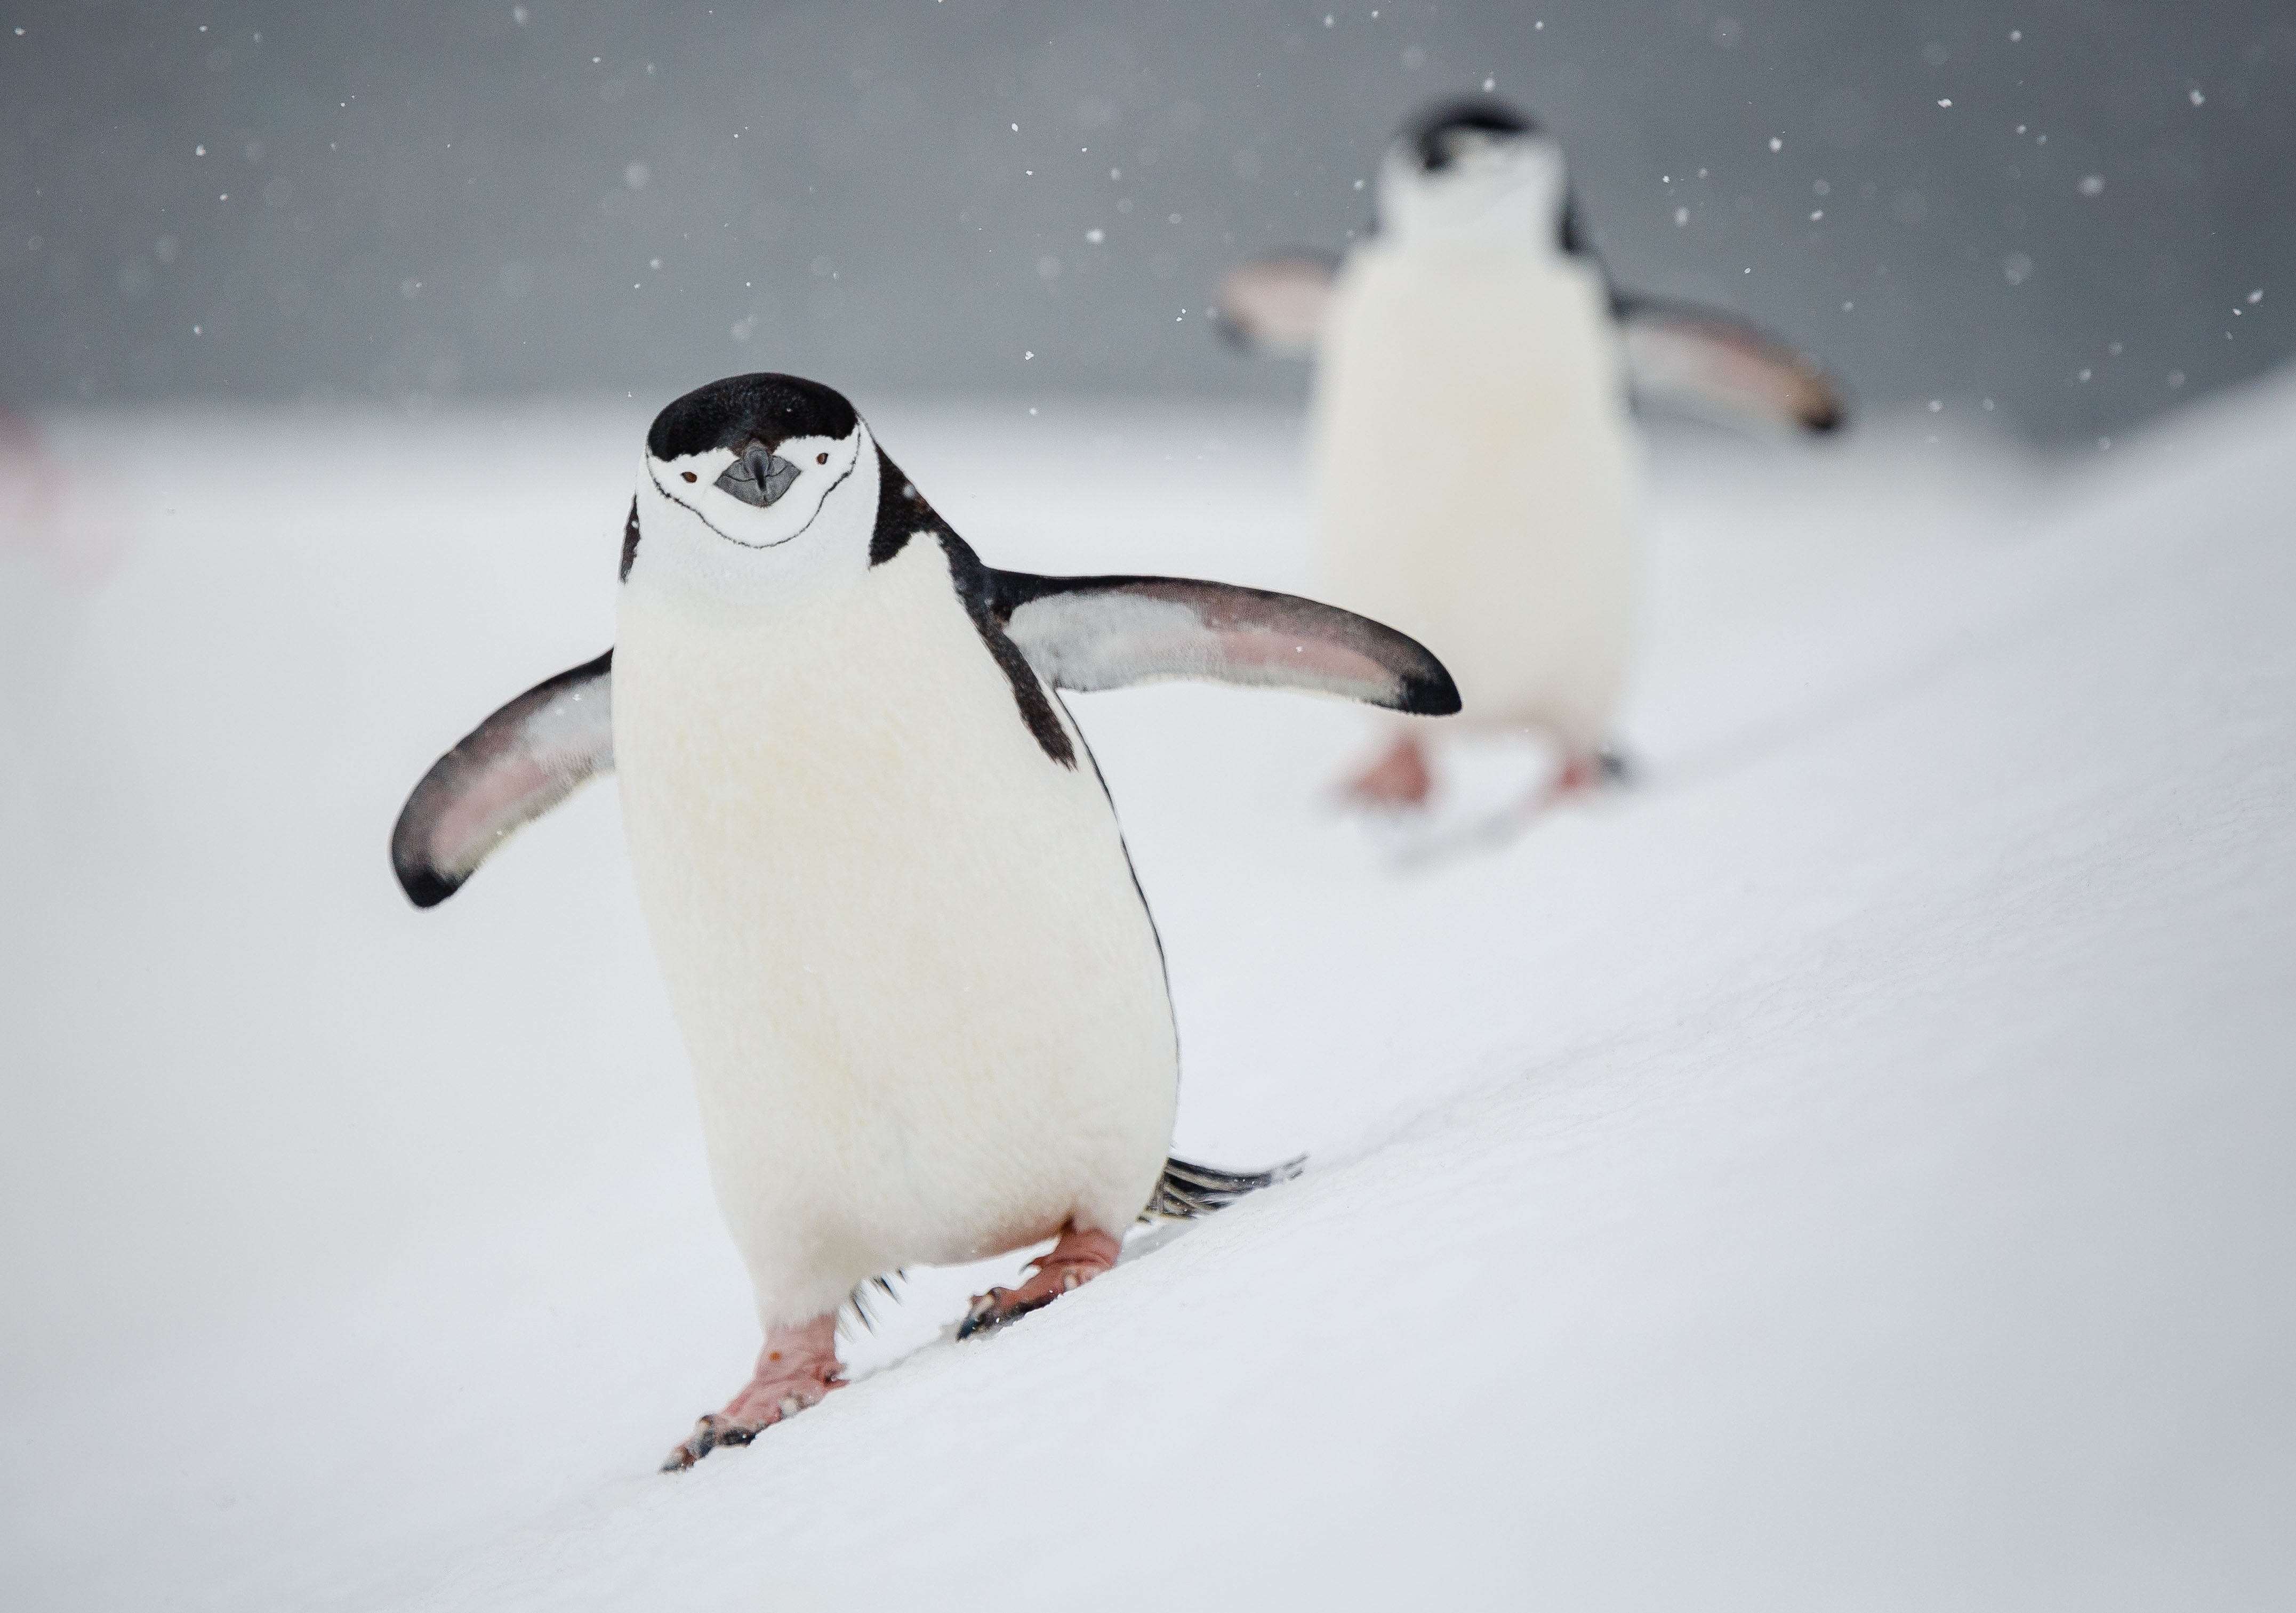 Chinstrap penguins toddle along an incline, delighting Quark passengers in Antarctica